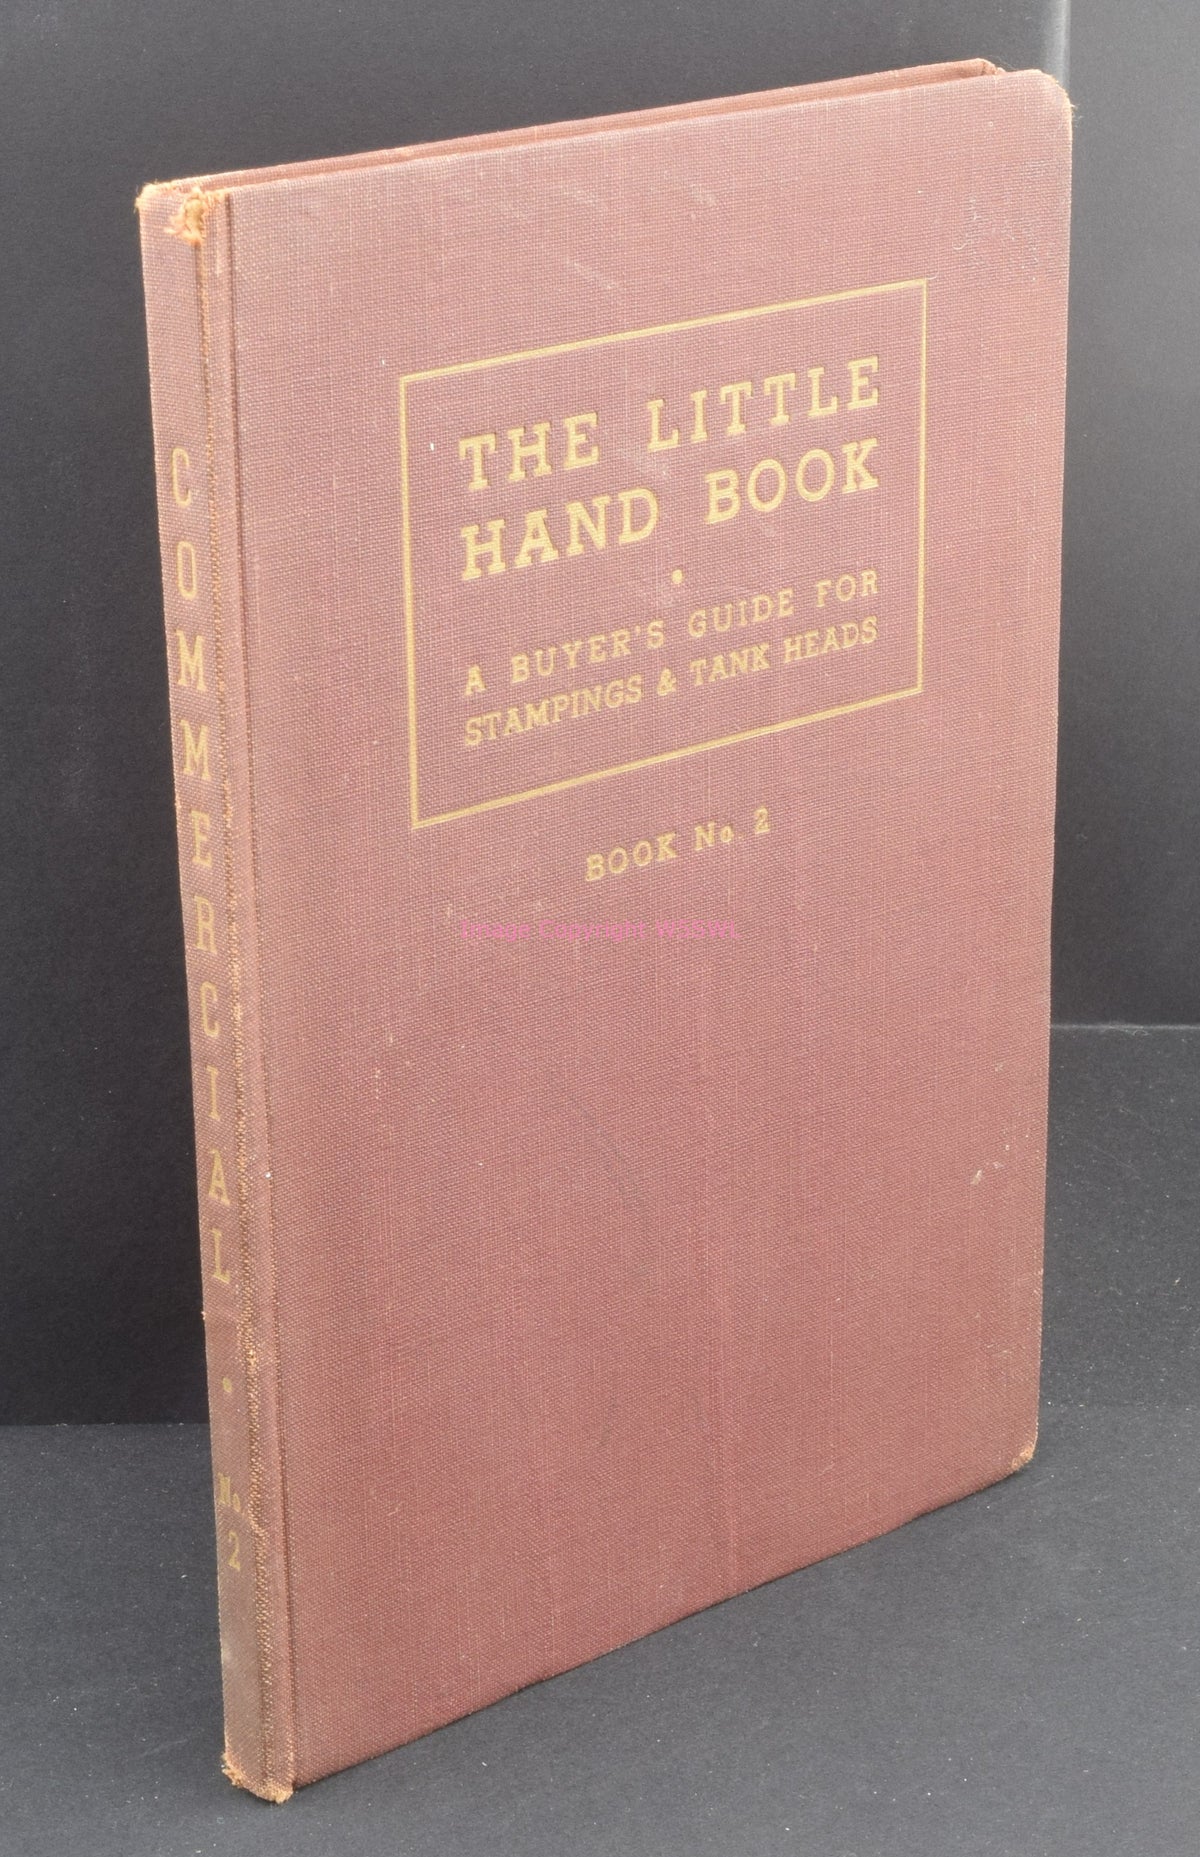 The Little Hand Book Buyers Guide For Stampings & Tank Heads Book No. 2 - Dave's Hobby Shop by W5SWL